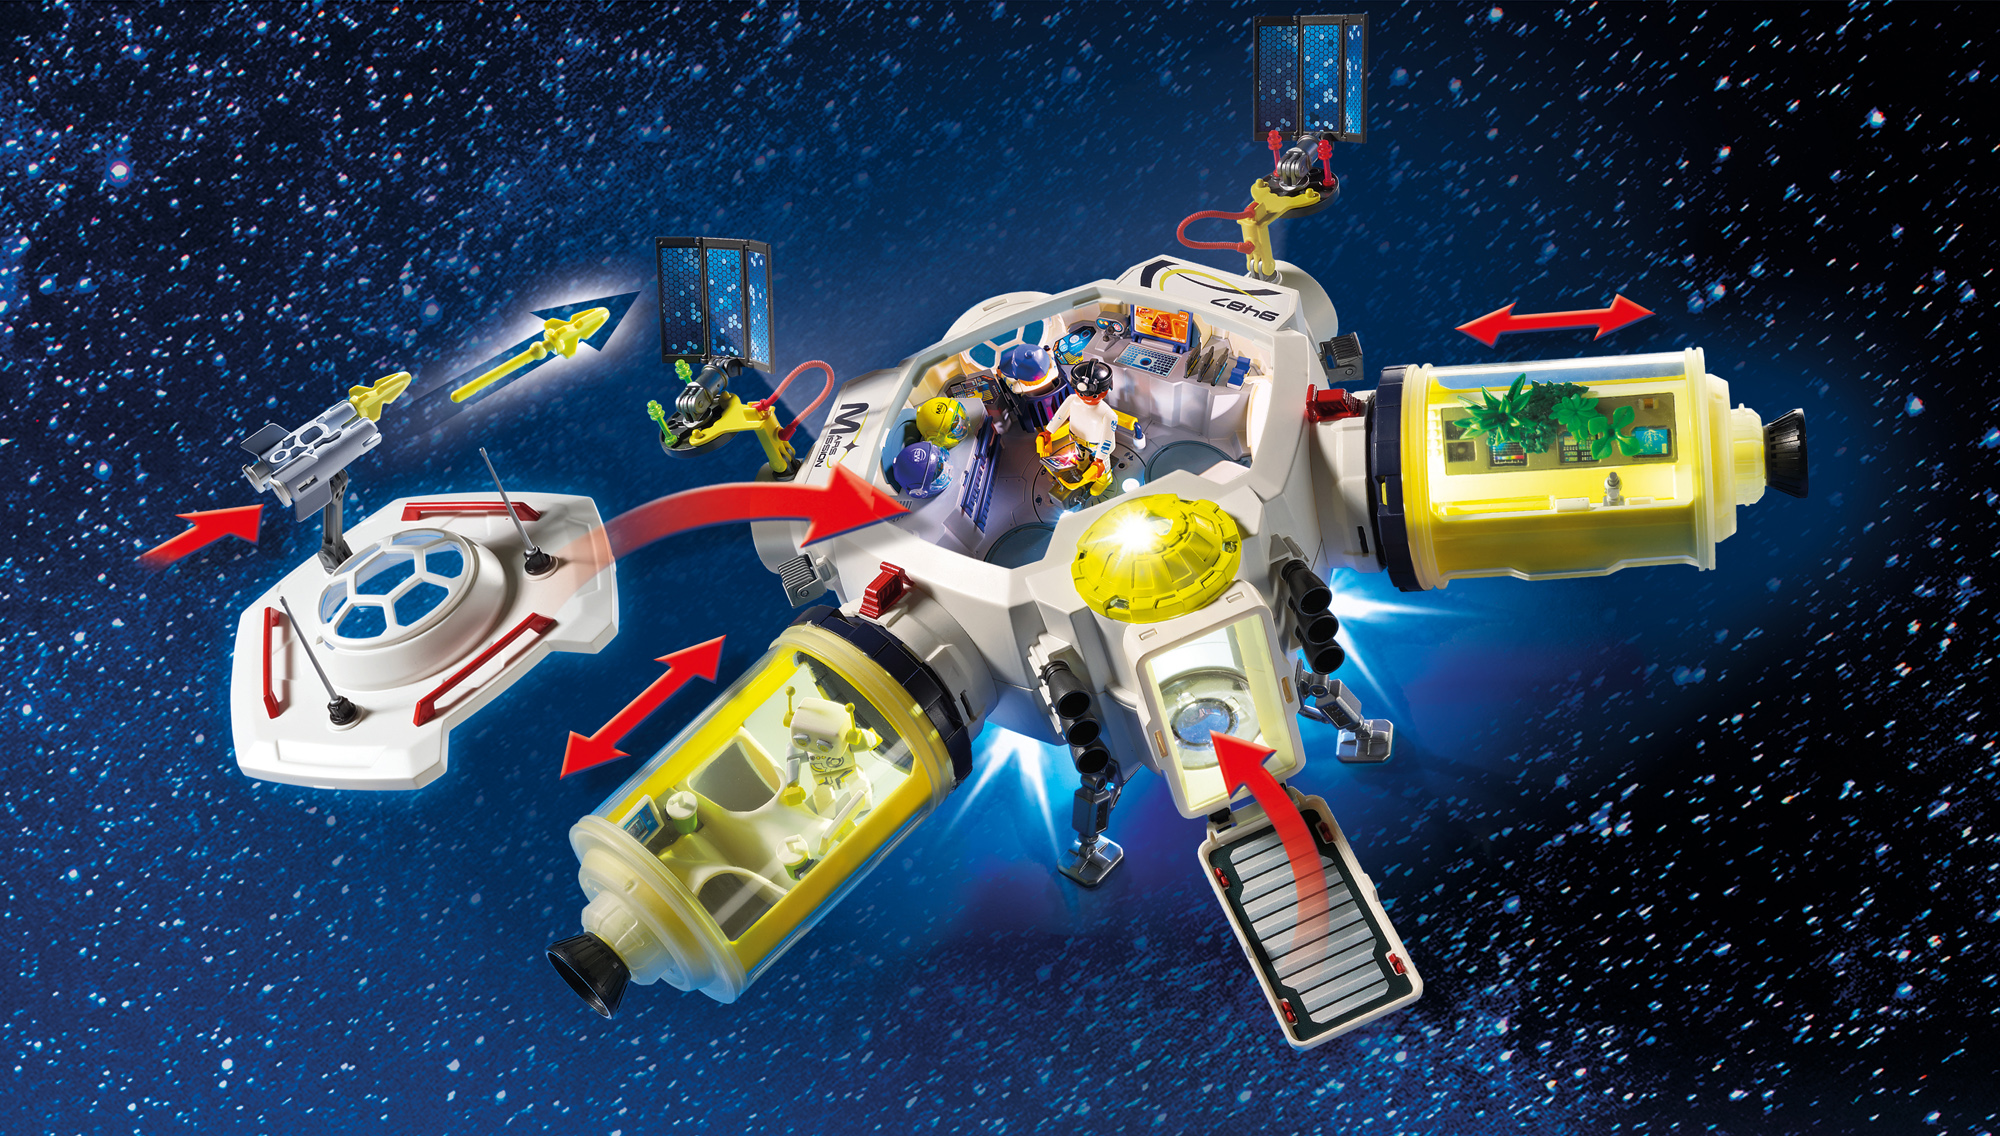 PLAYMOBIL Mars Space Station - image 2 of 9